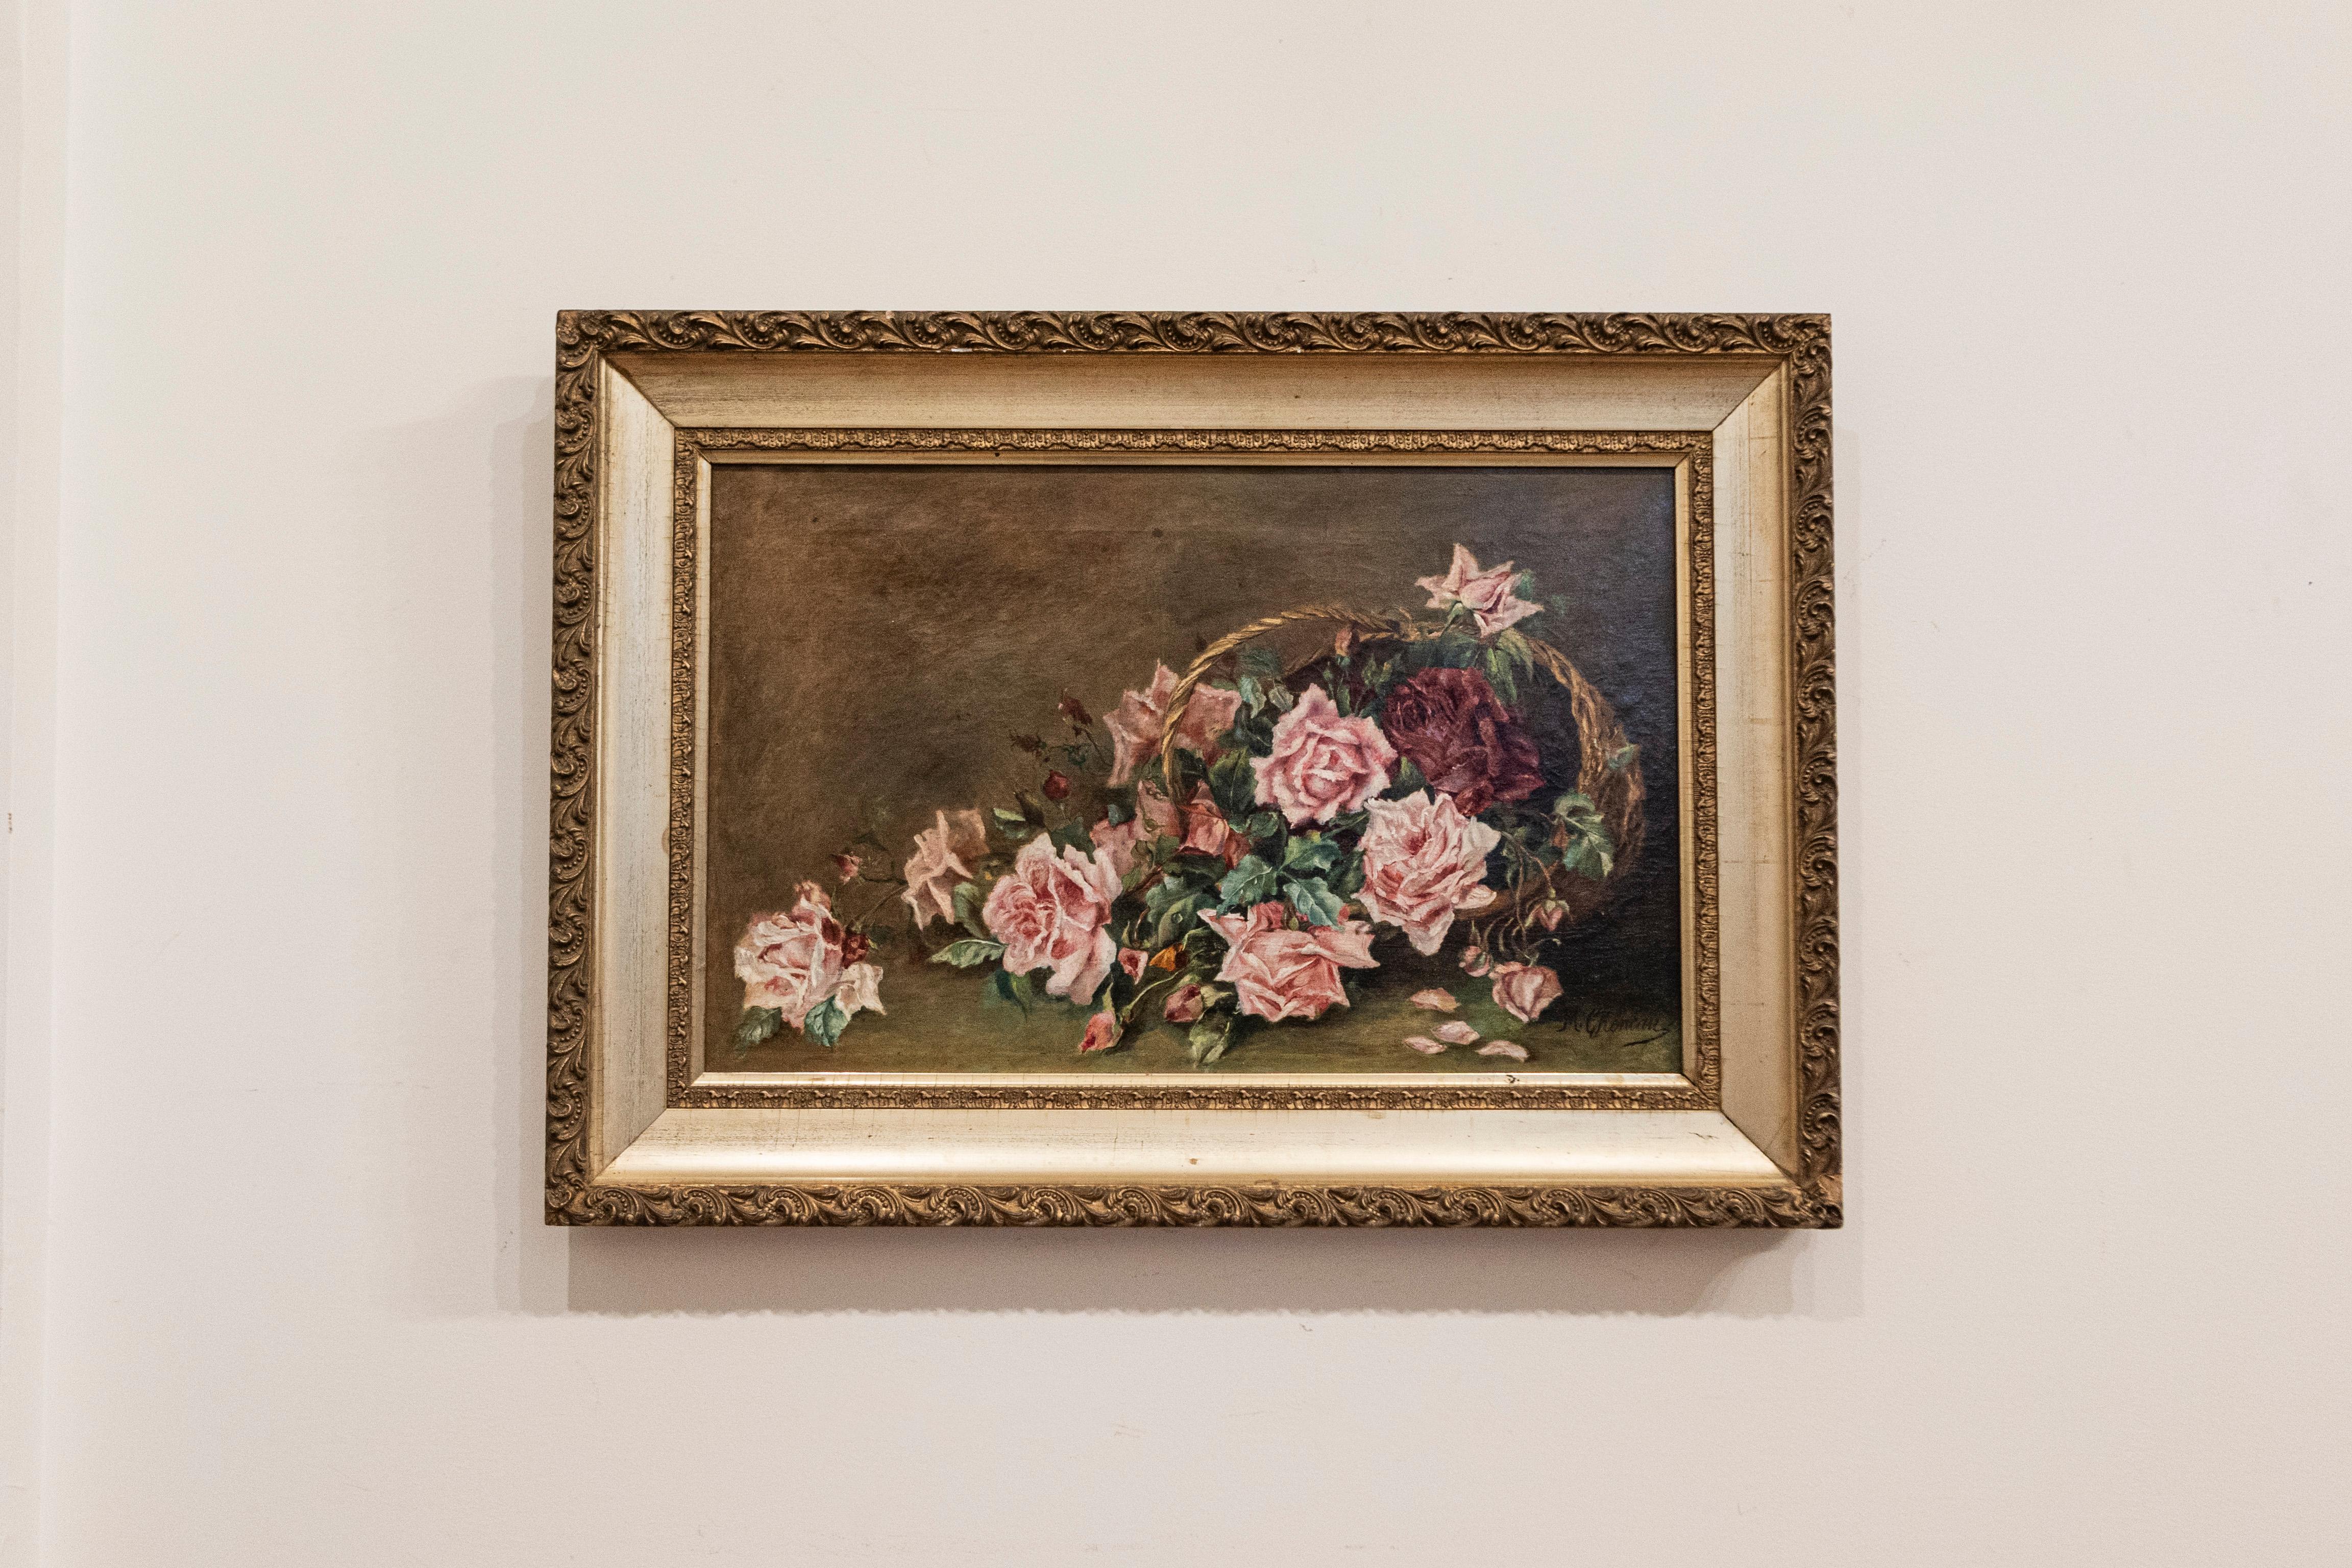 A French framed oil on canvas floral painting from the 19th century, depicting roses. Born in France during the 19th century, this exquisite oil on canvas painting features a delicate bouquet of pink roses falling on a tabletop from a tipped over